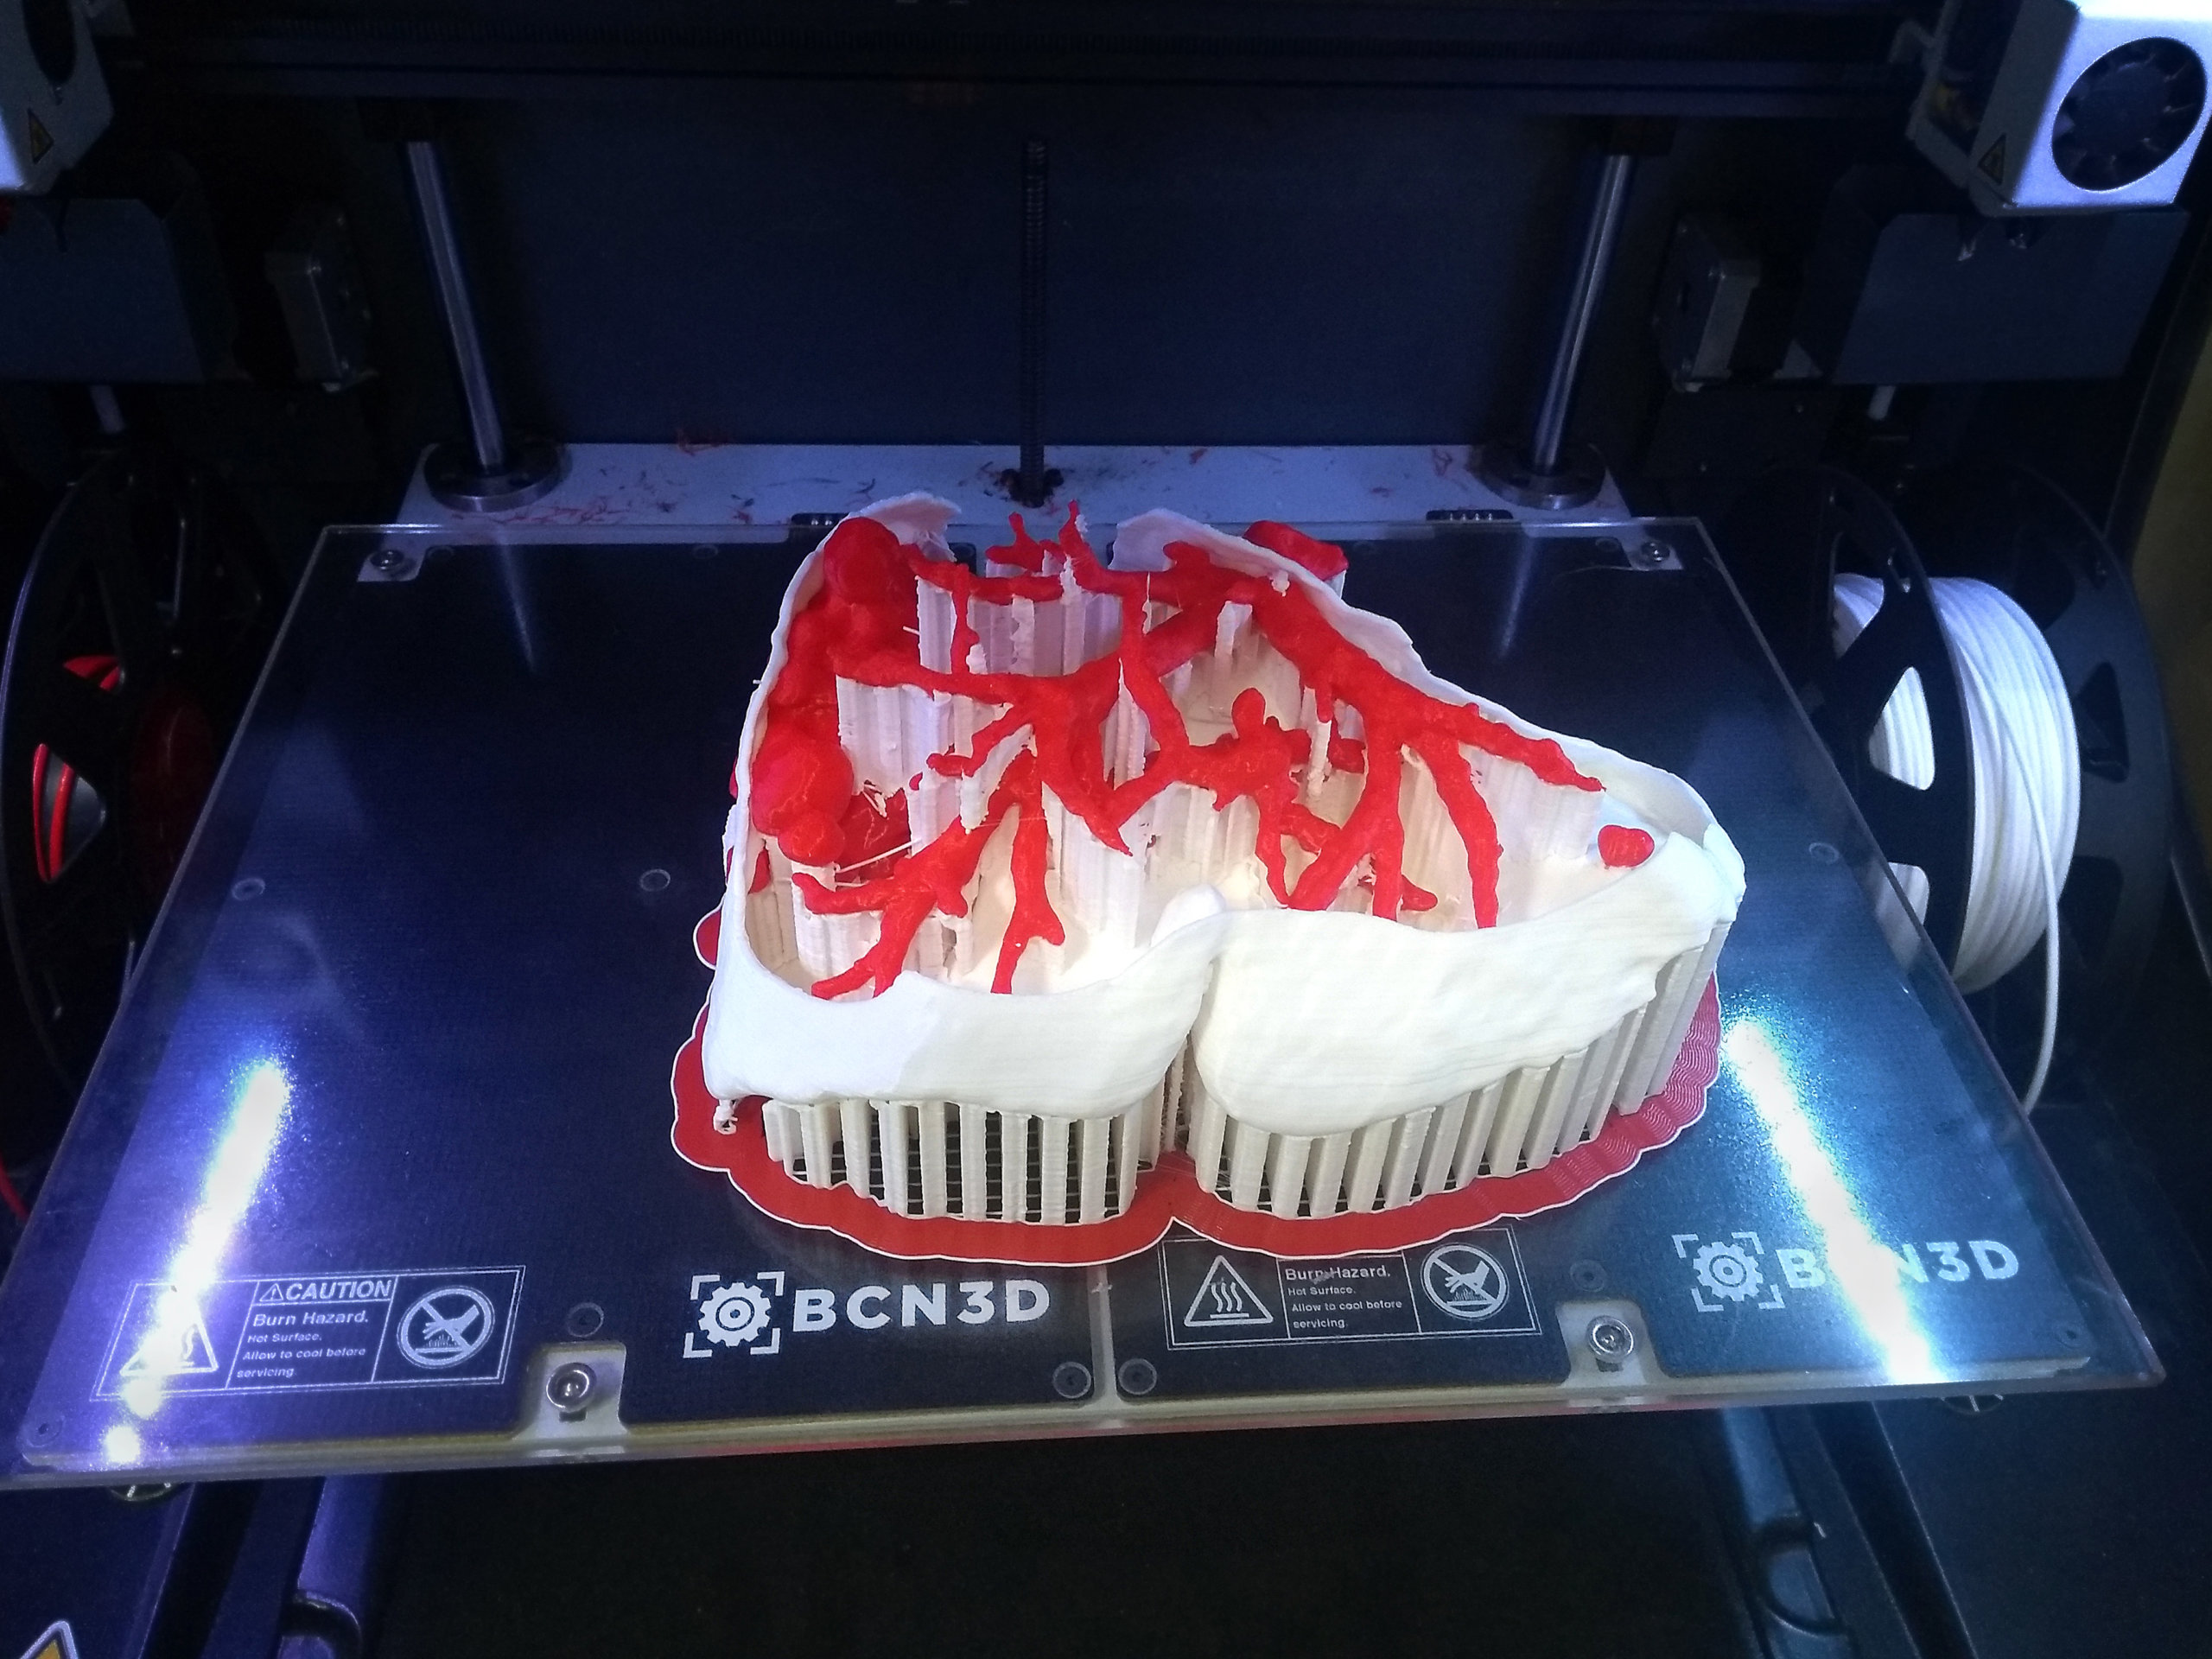 Mirai3D uses 3D printing to develop models for surgical preparation